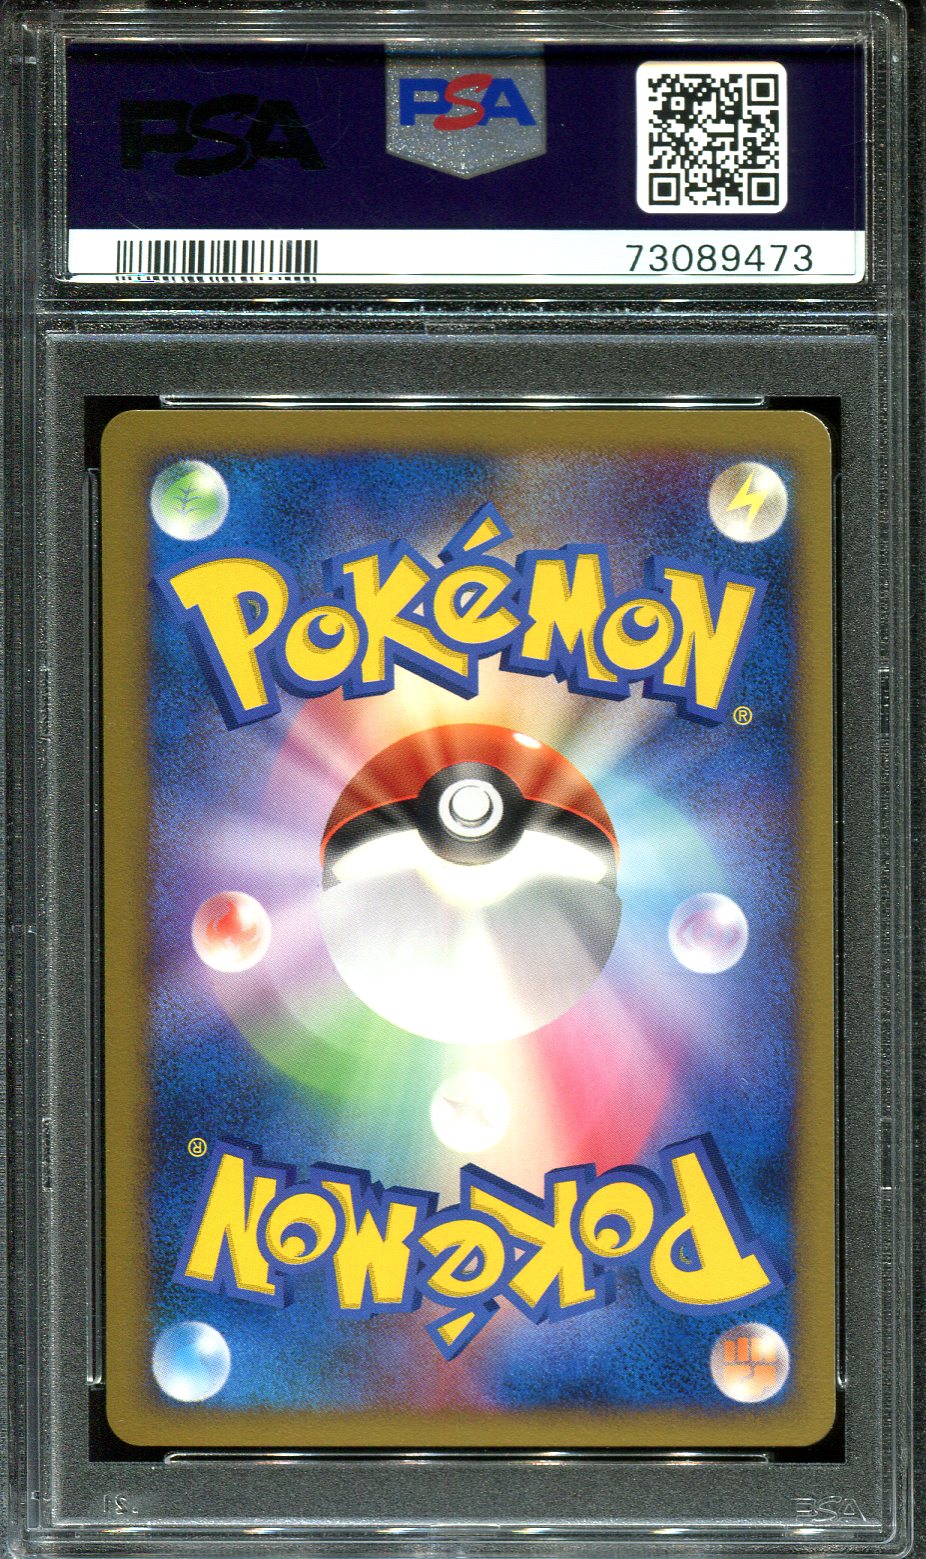 PIPLUP 454 PSA 10 POKEMON SPACE TIME CREATION DP1 JAPANESE